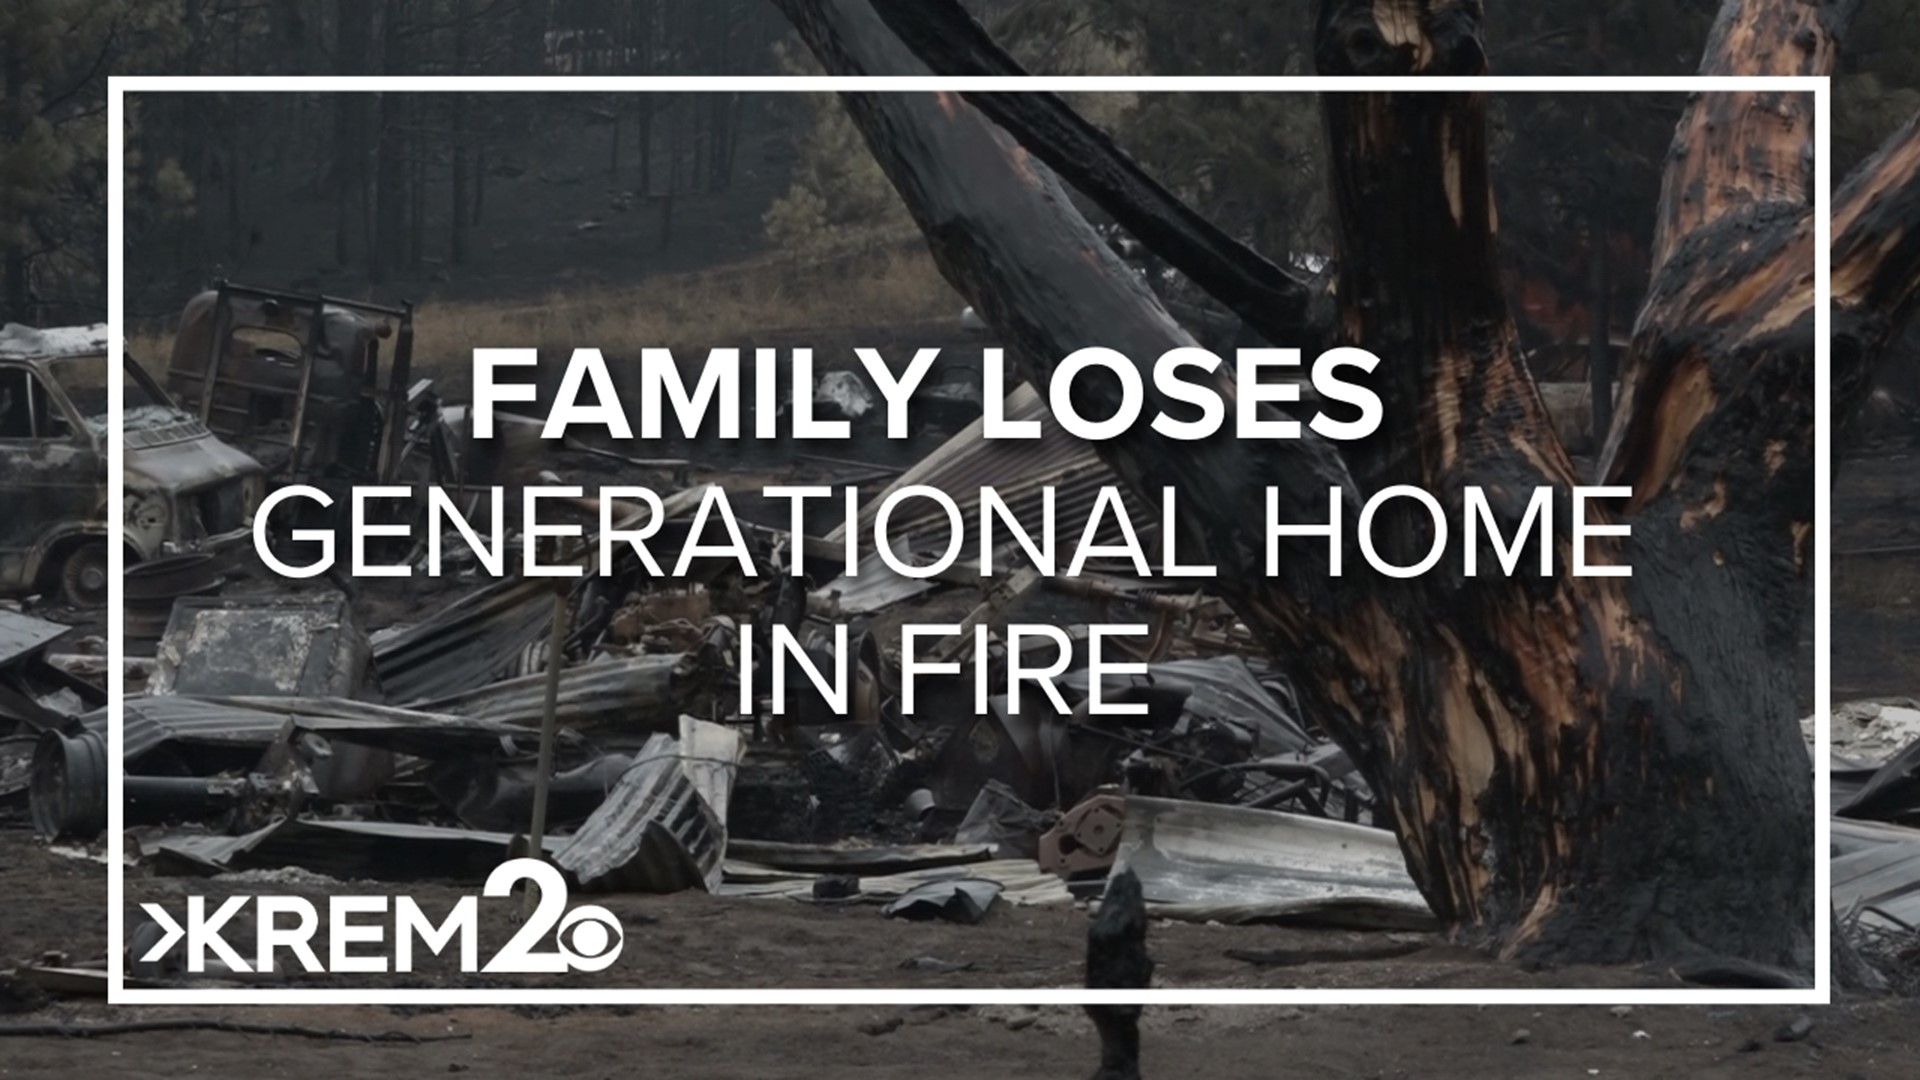 Three generations' worth of memories and land was burned in the Elk Fire